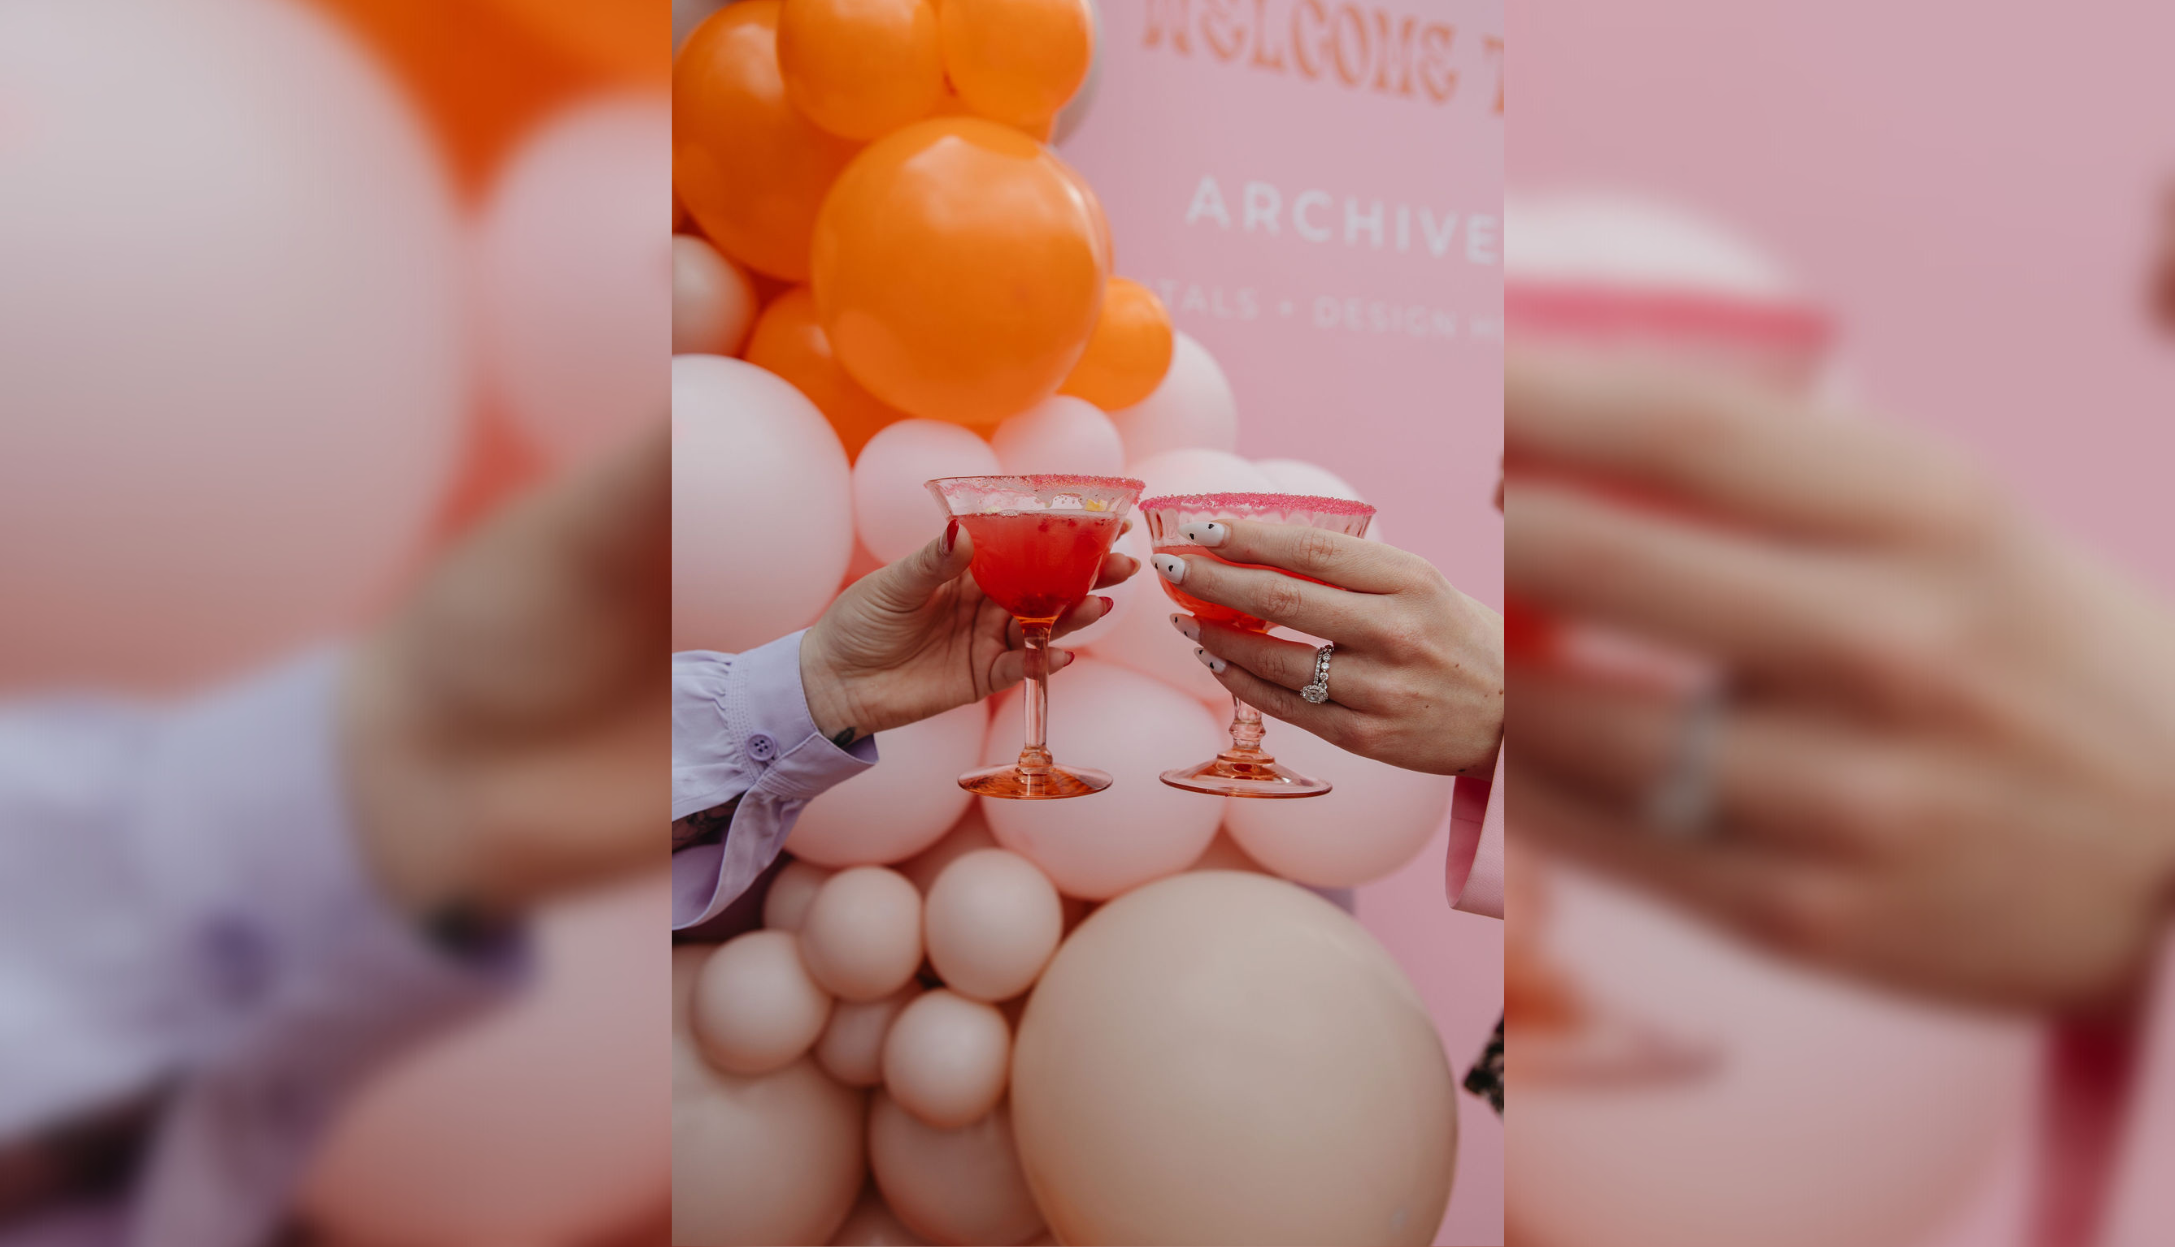 The vibrant colors from this Valentine's Day Event pair together beautifully to create the perfect party setting. Our Blush Champagne Coupes were a great touch to add to any themed event. Archive has everything you need for your event rentals in Orange County, Los Angeles, and San Diego areas!